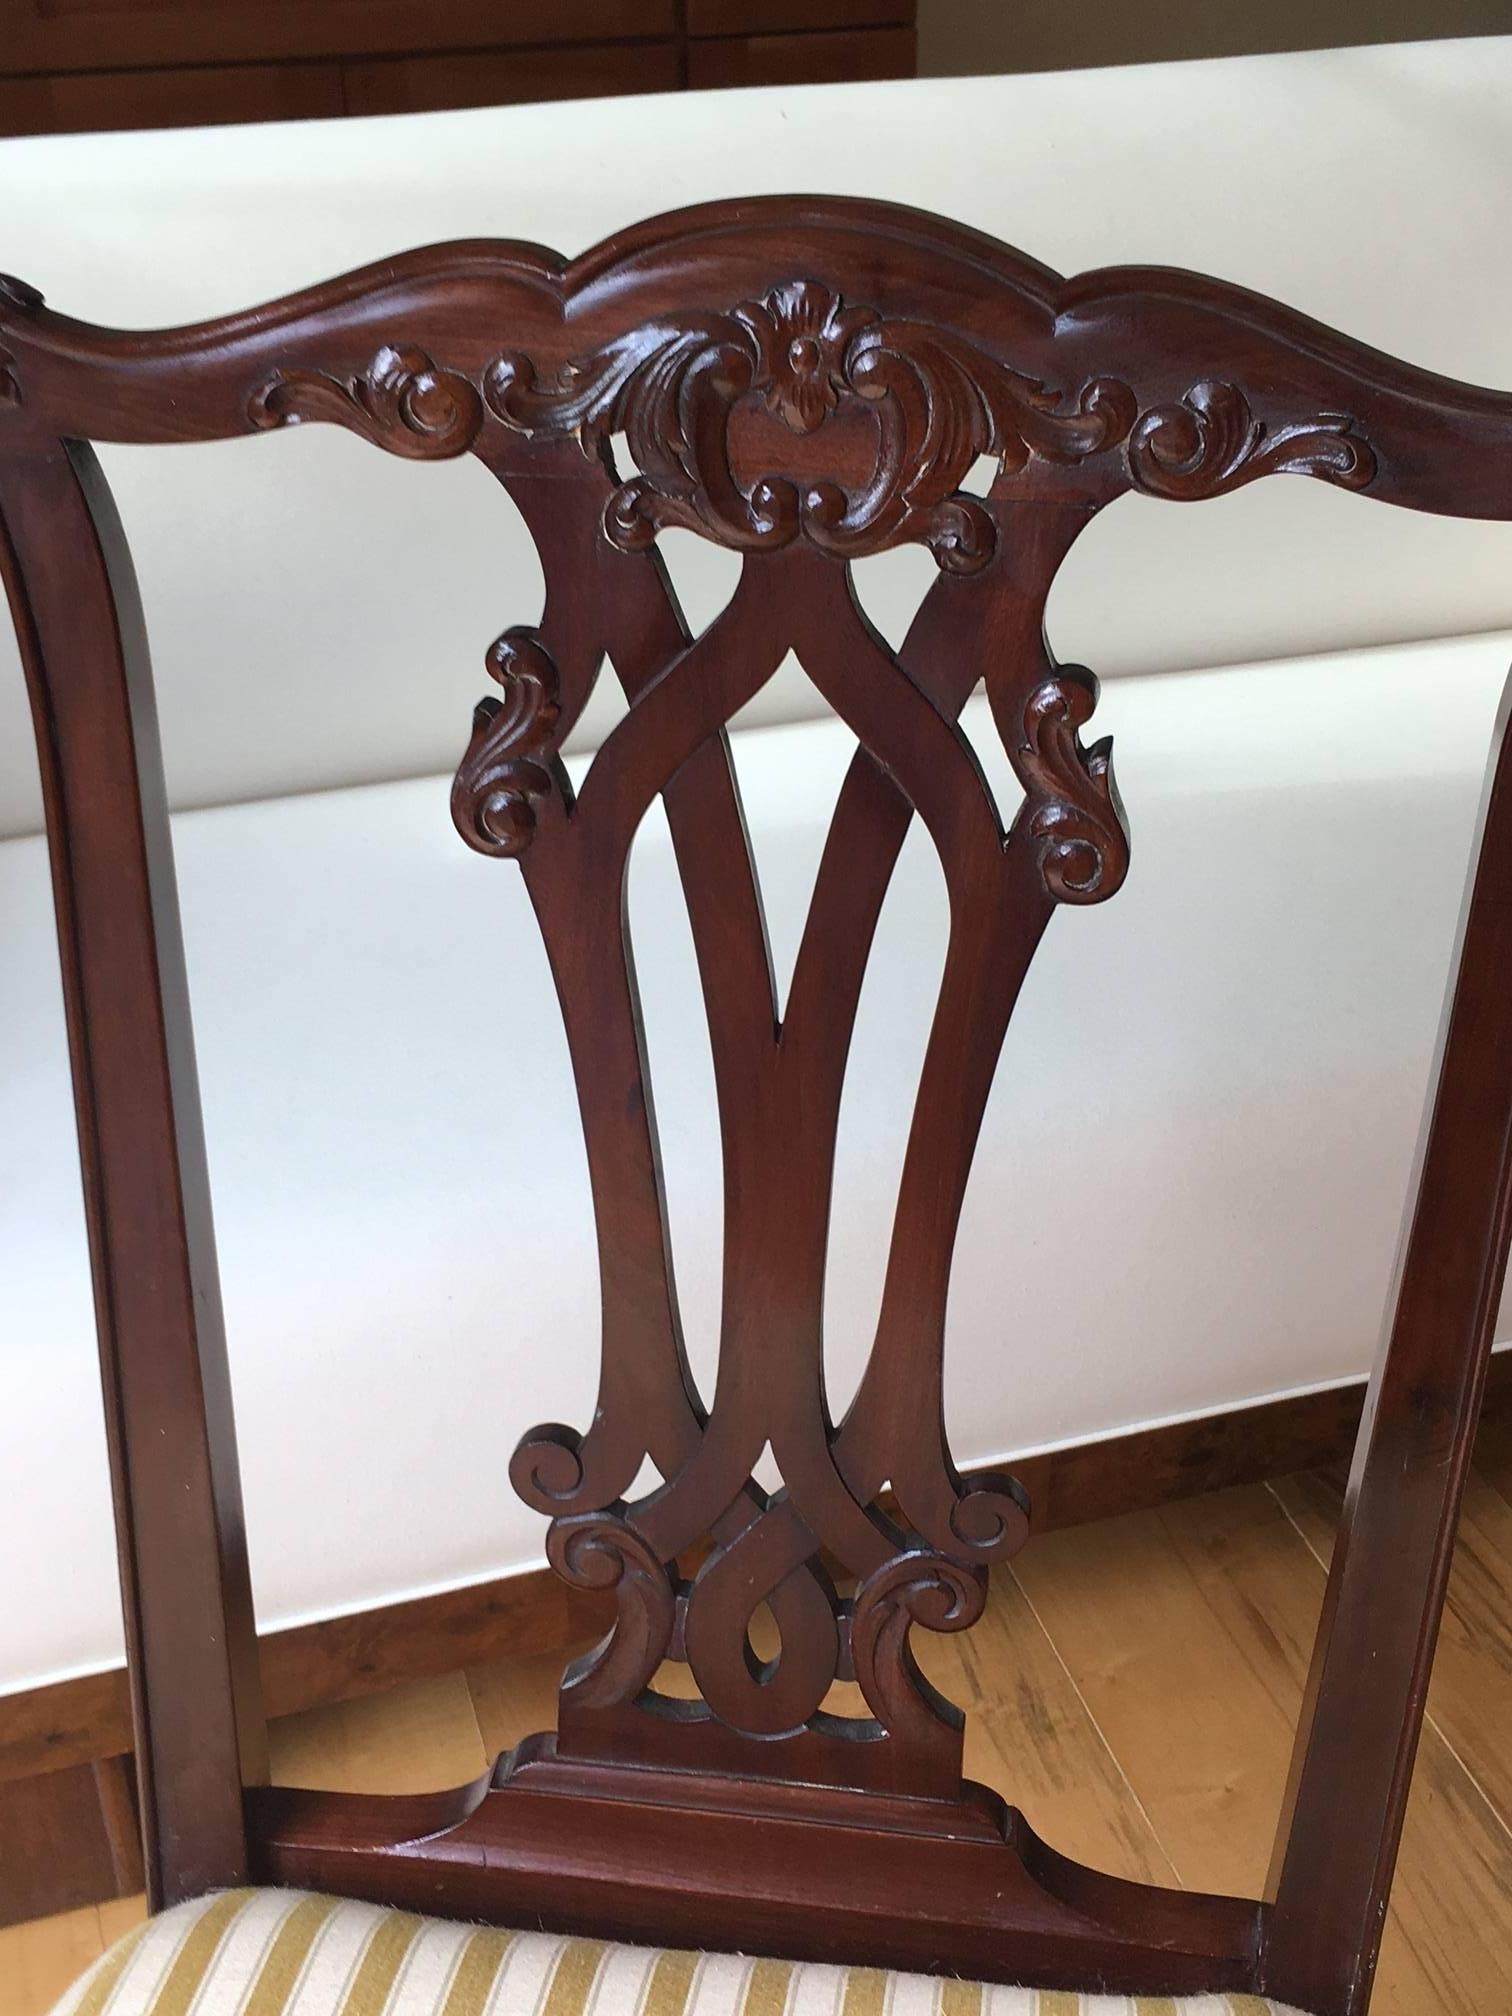 Absolutely charming pair of Danish Chippendale style side chairs, done in mahogany, circa 1870. Carved and pretty floral back splat, foliate knees, claw and ball feet in the front, saber legs in the back.

Very good antique condition, minor